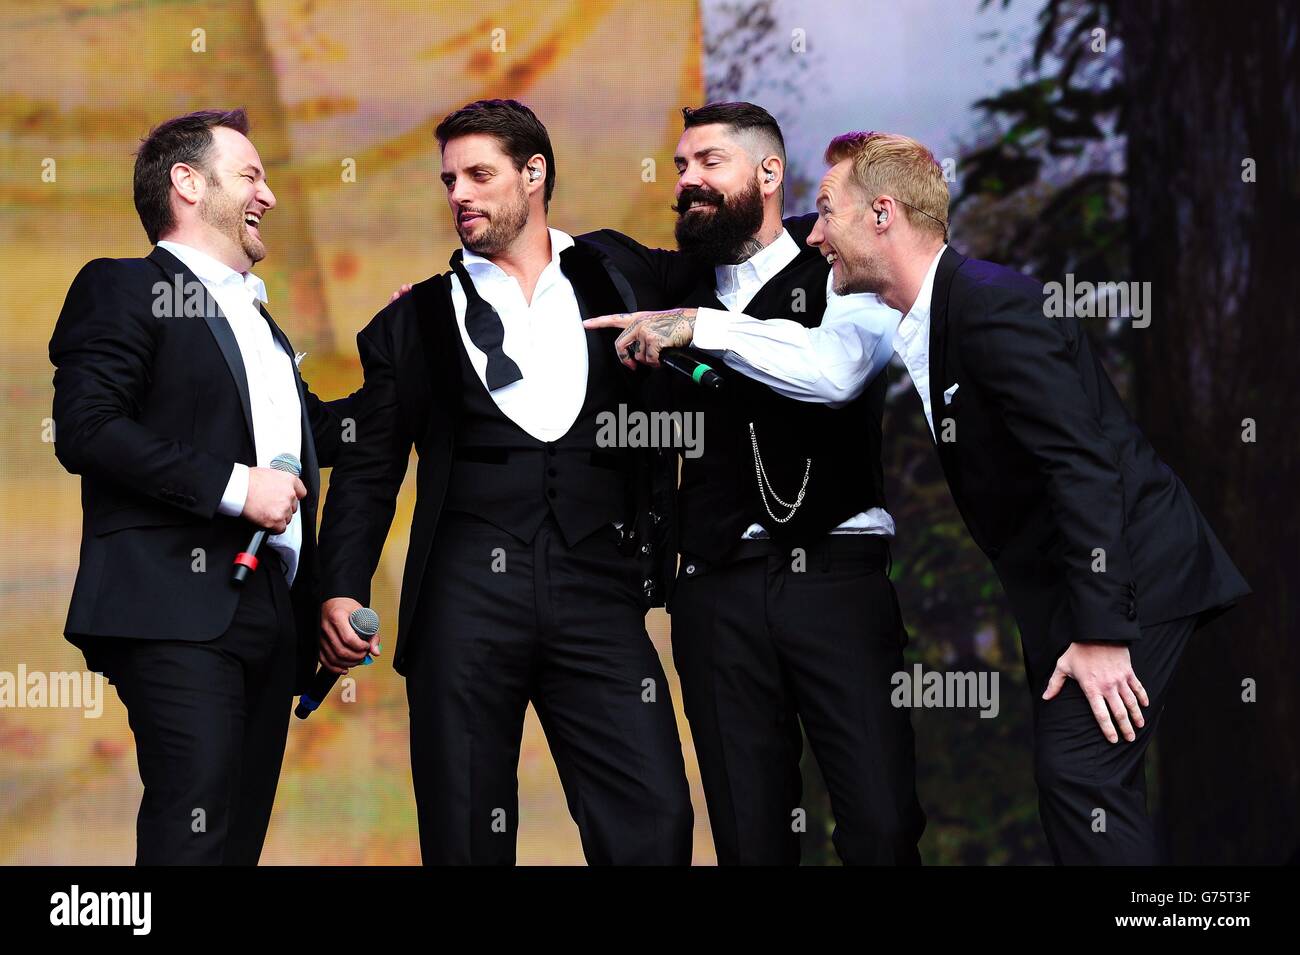 Boyzone (from left to right) Mikey Graham, Keith Duffy, Shane Lynch and Ronan Keating performing at the Barclaycard British Summer Time Festival in Hyde Park, London. Stock Photo